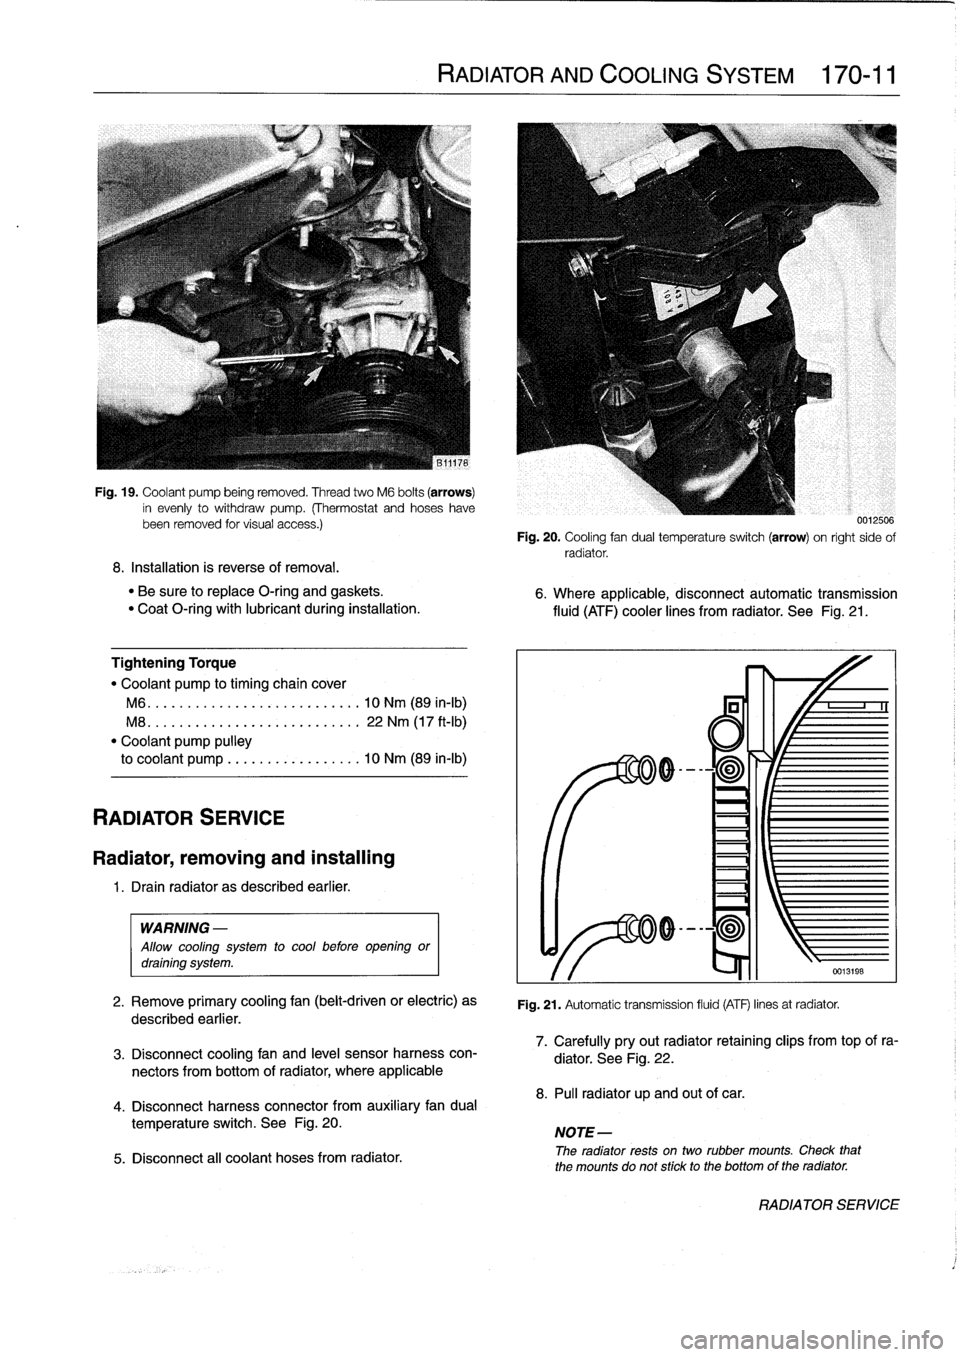 BMW 318i 1997 E36 Workshop Manual 
Fig
.
19
.
Coolant
pump
being
removed
.
Thread
two
M6
bolts
(arrows)
in
evenly
to
withdraw
pump
.
(Thermostat
and
hoseshavebeen
removed
tor
visual
access
.)

8
.
Installation
is
reverse
of
removal
.
